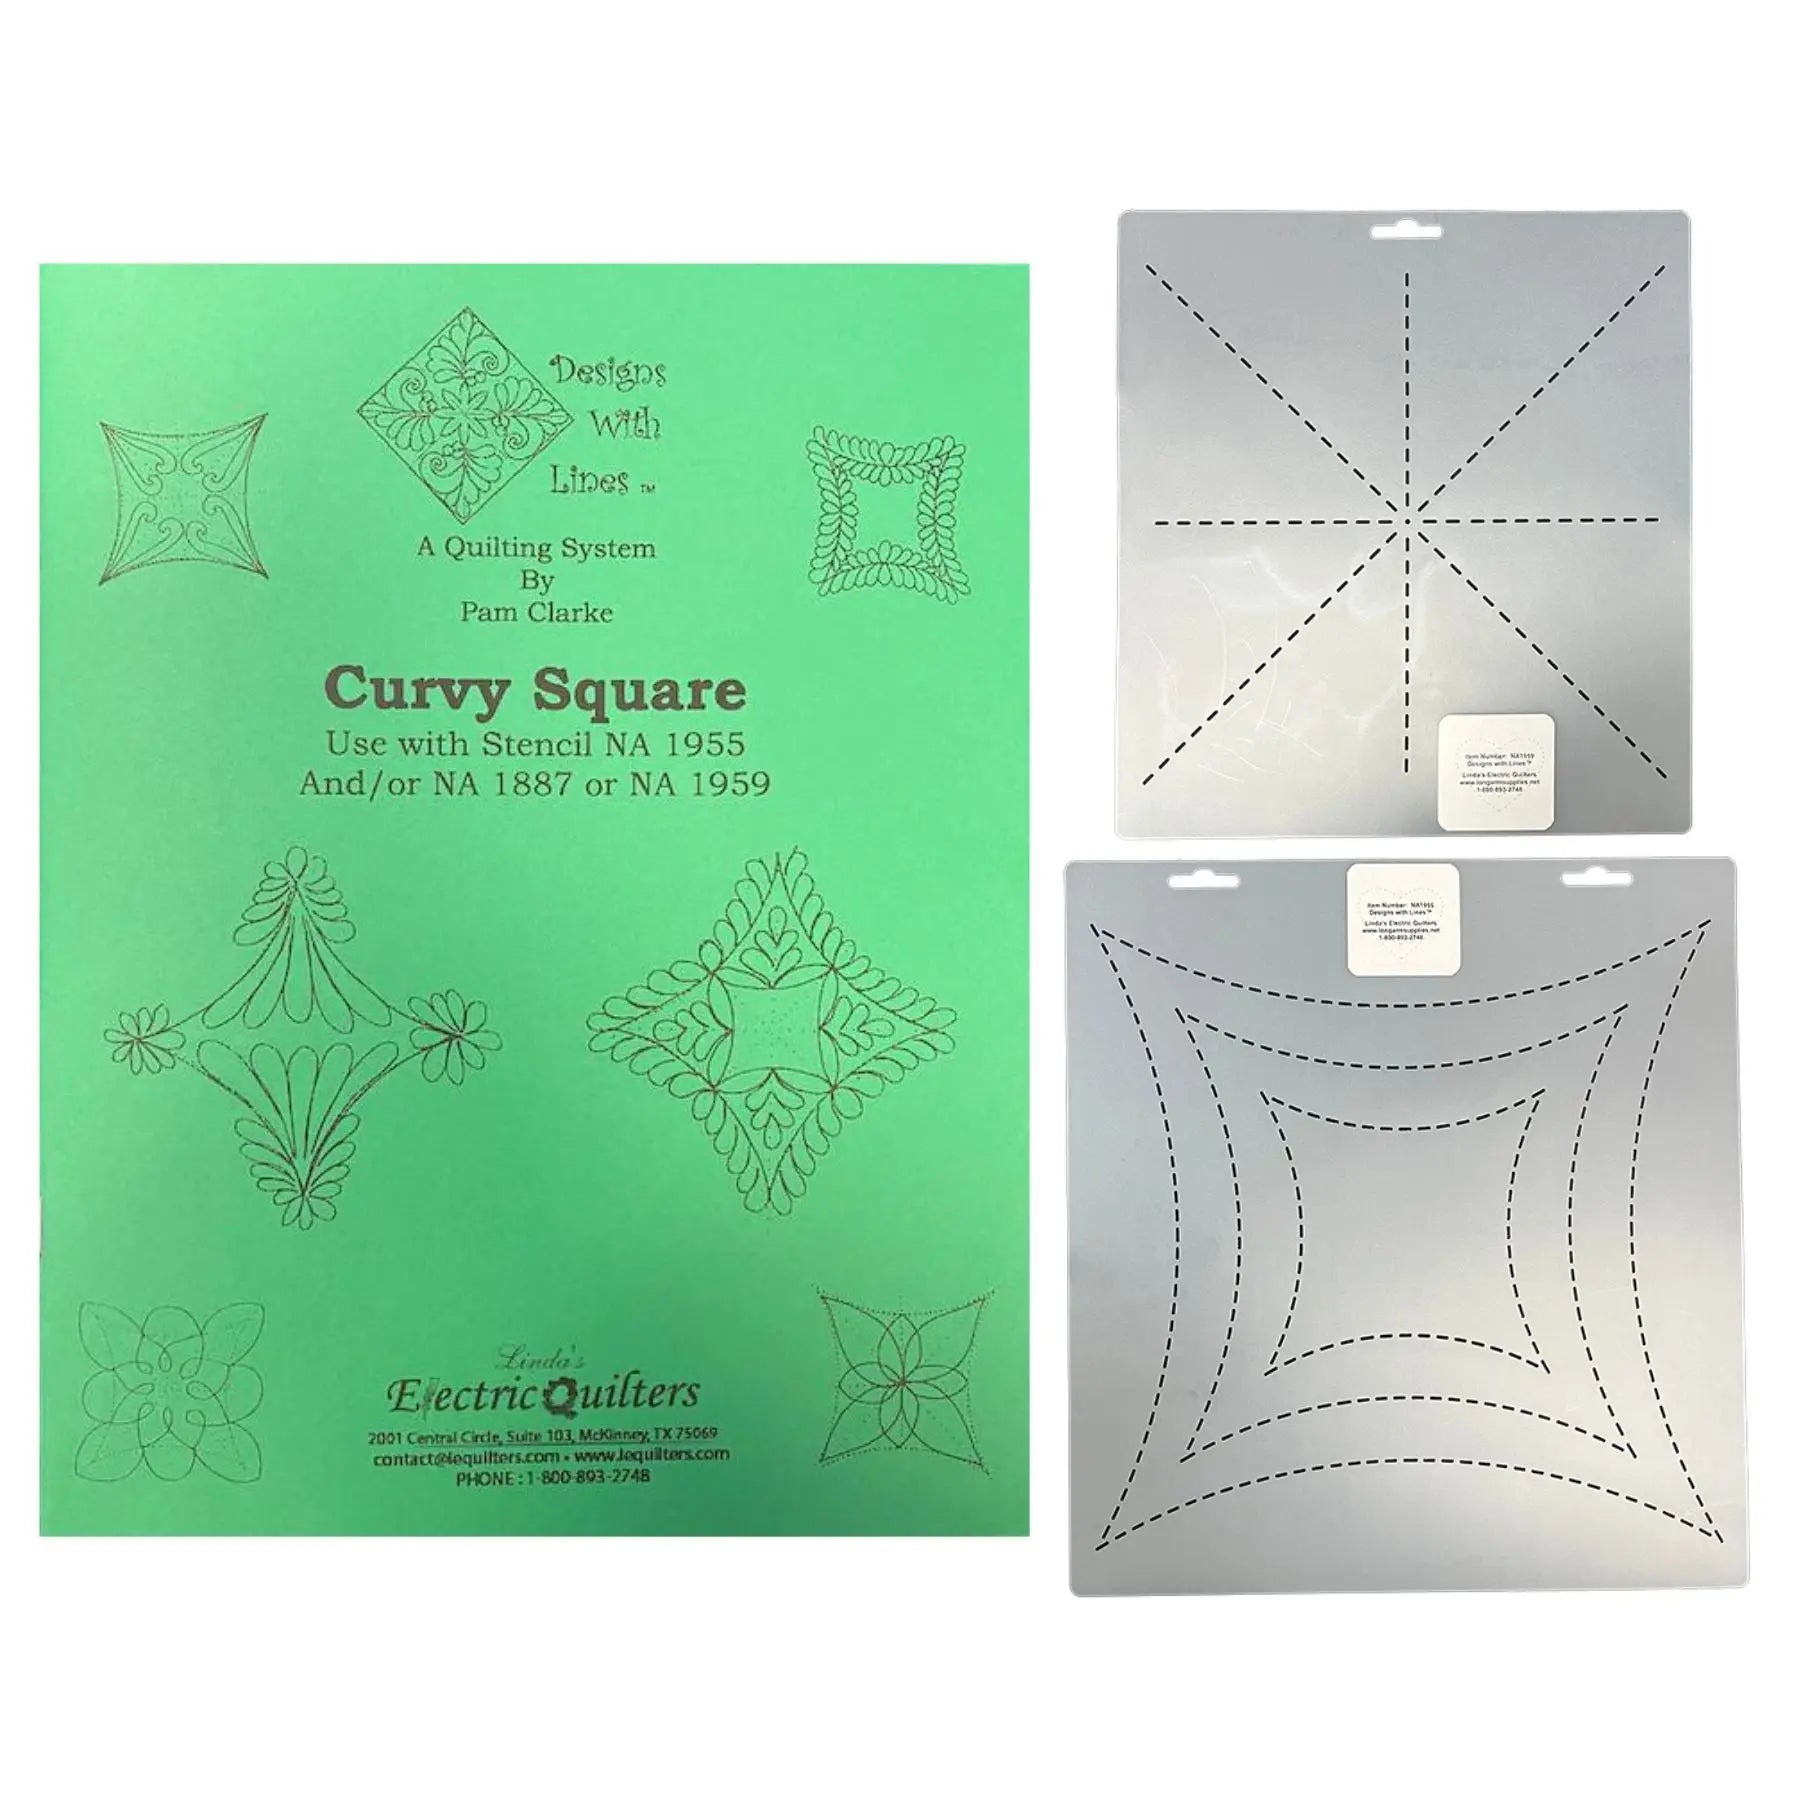 Curvy Square Book and Stencil Kit - Linda's Electric Quilters